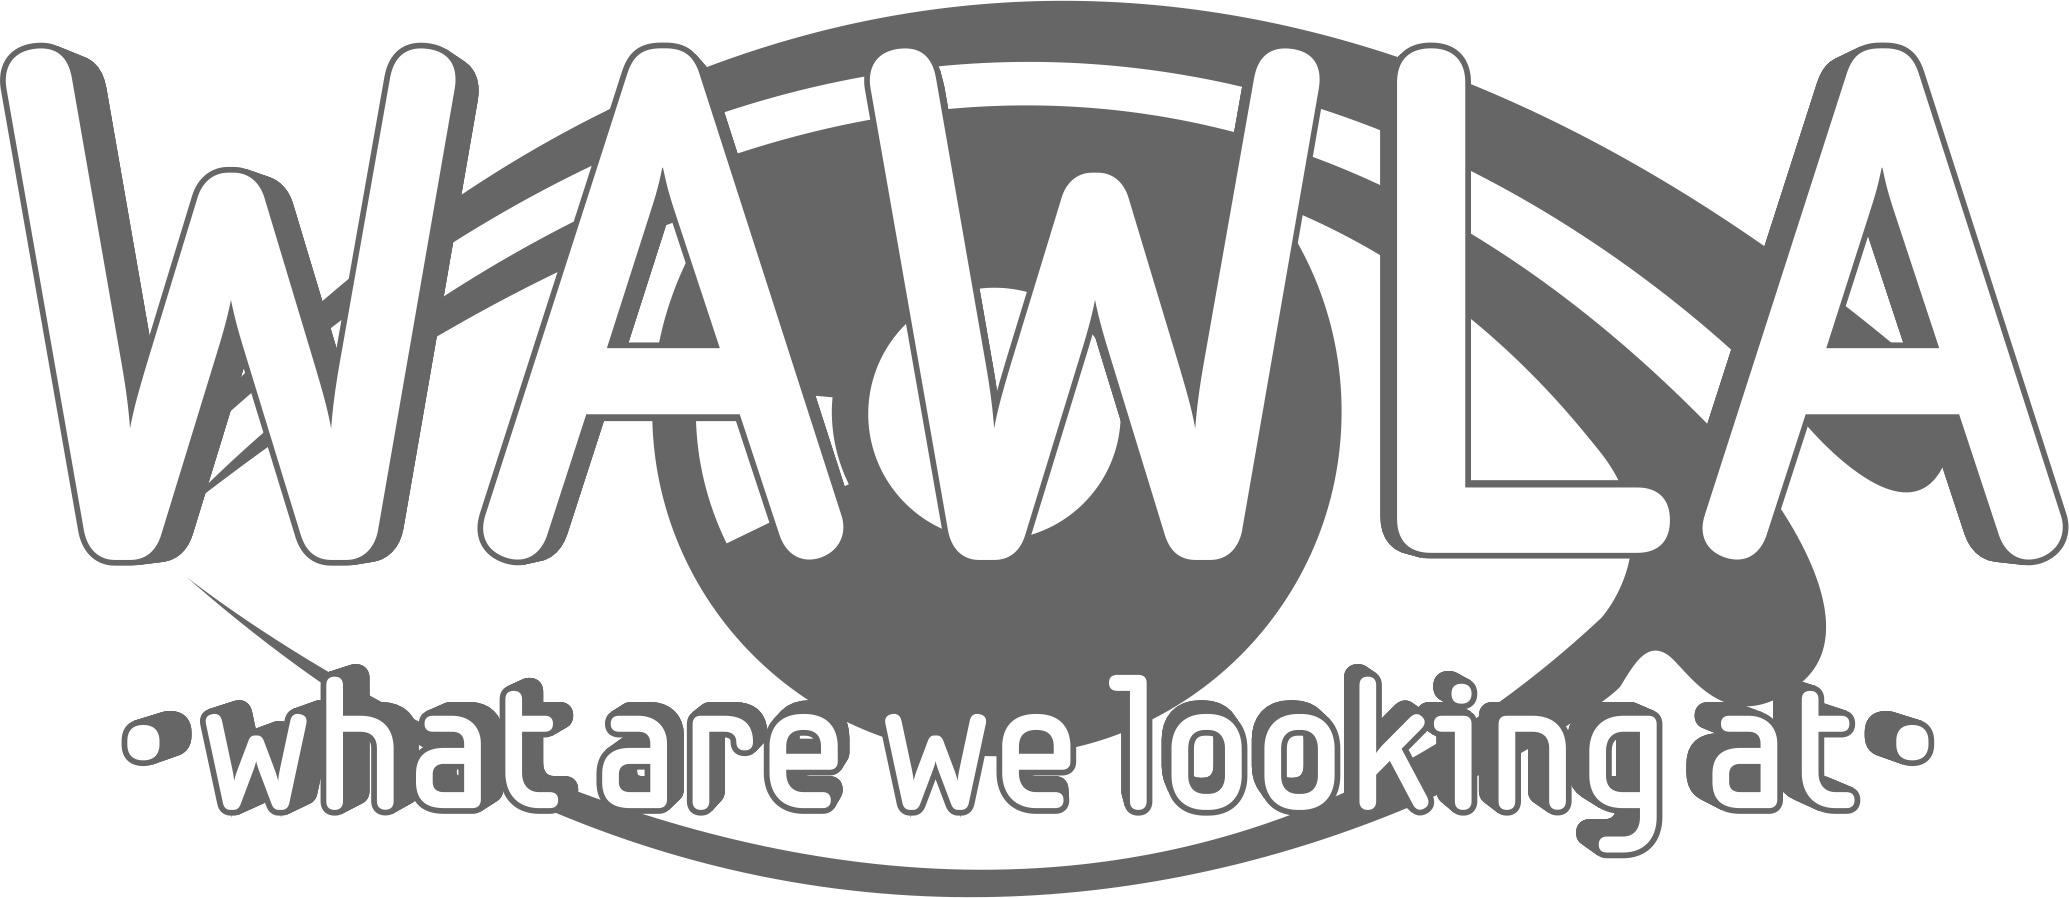 Wawla - What Are We Looking At